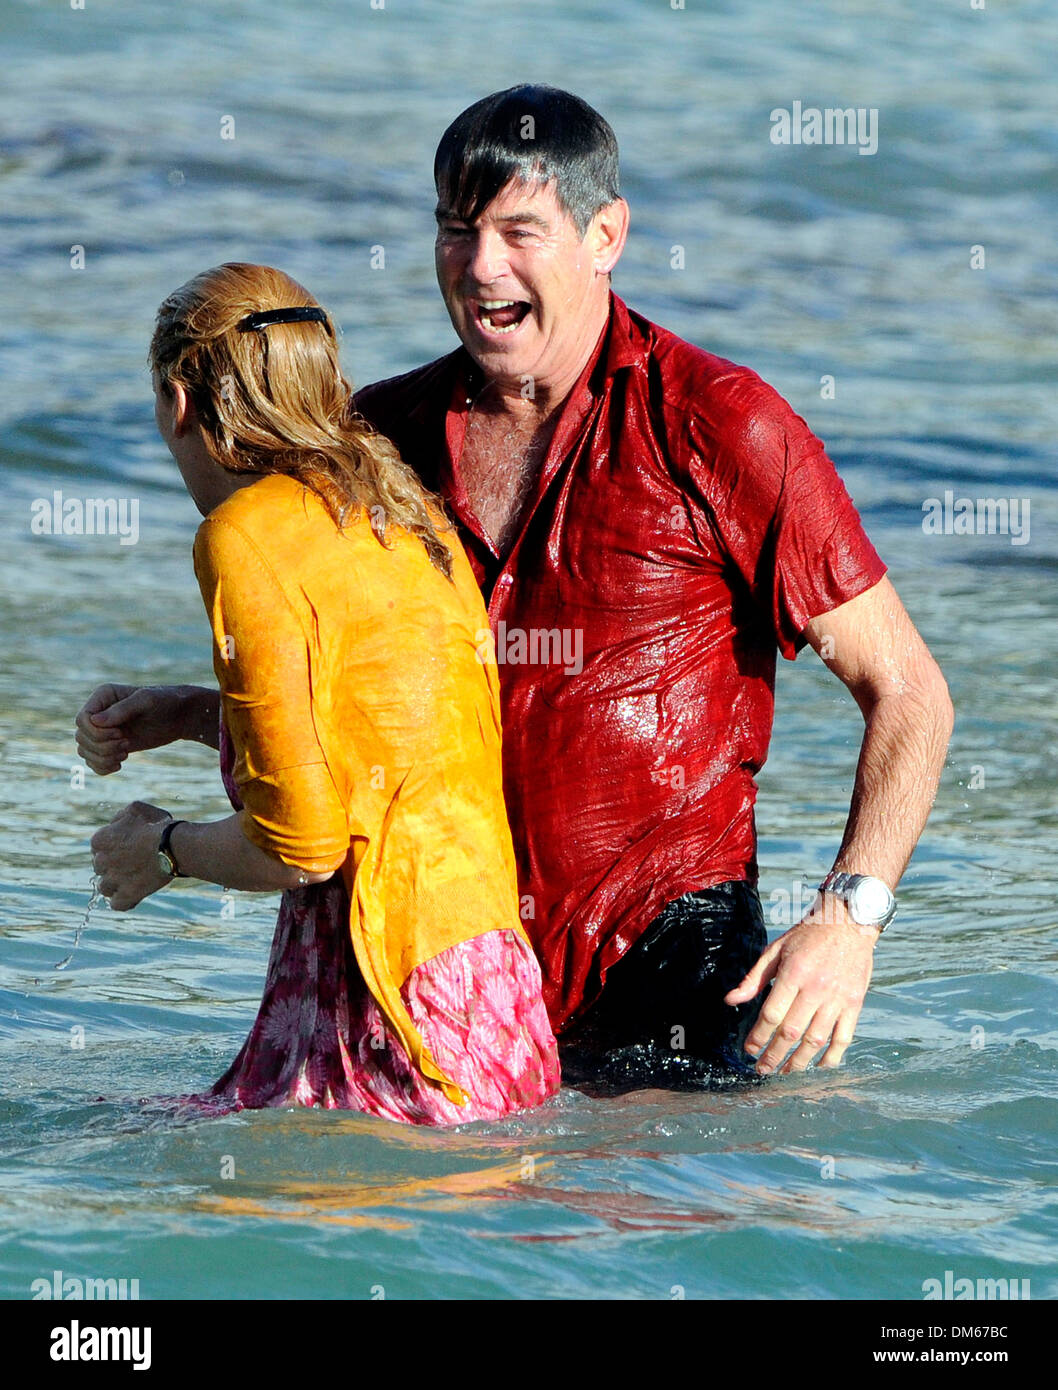 Actor Pierce Brosnan on the set of the movie 'A long way down'. Shot in Mallorca in October 2012 Stock Photo